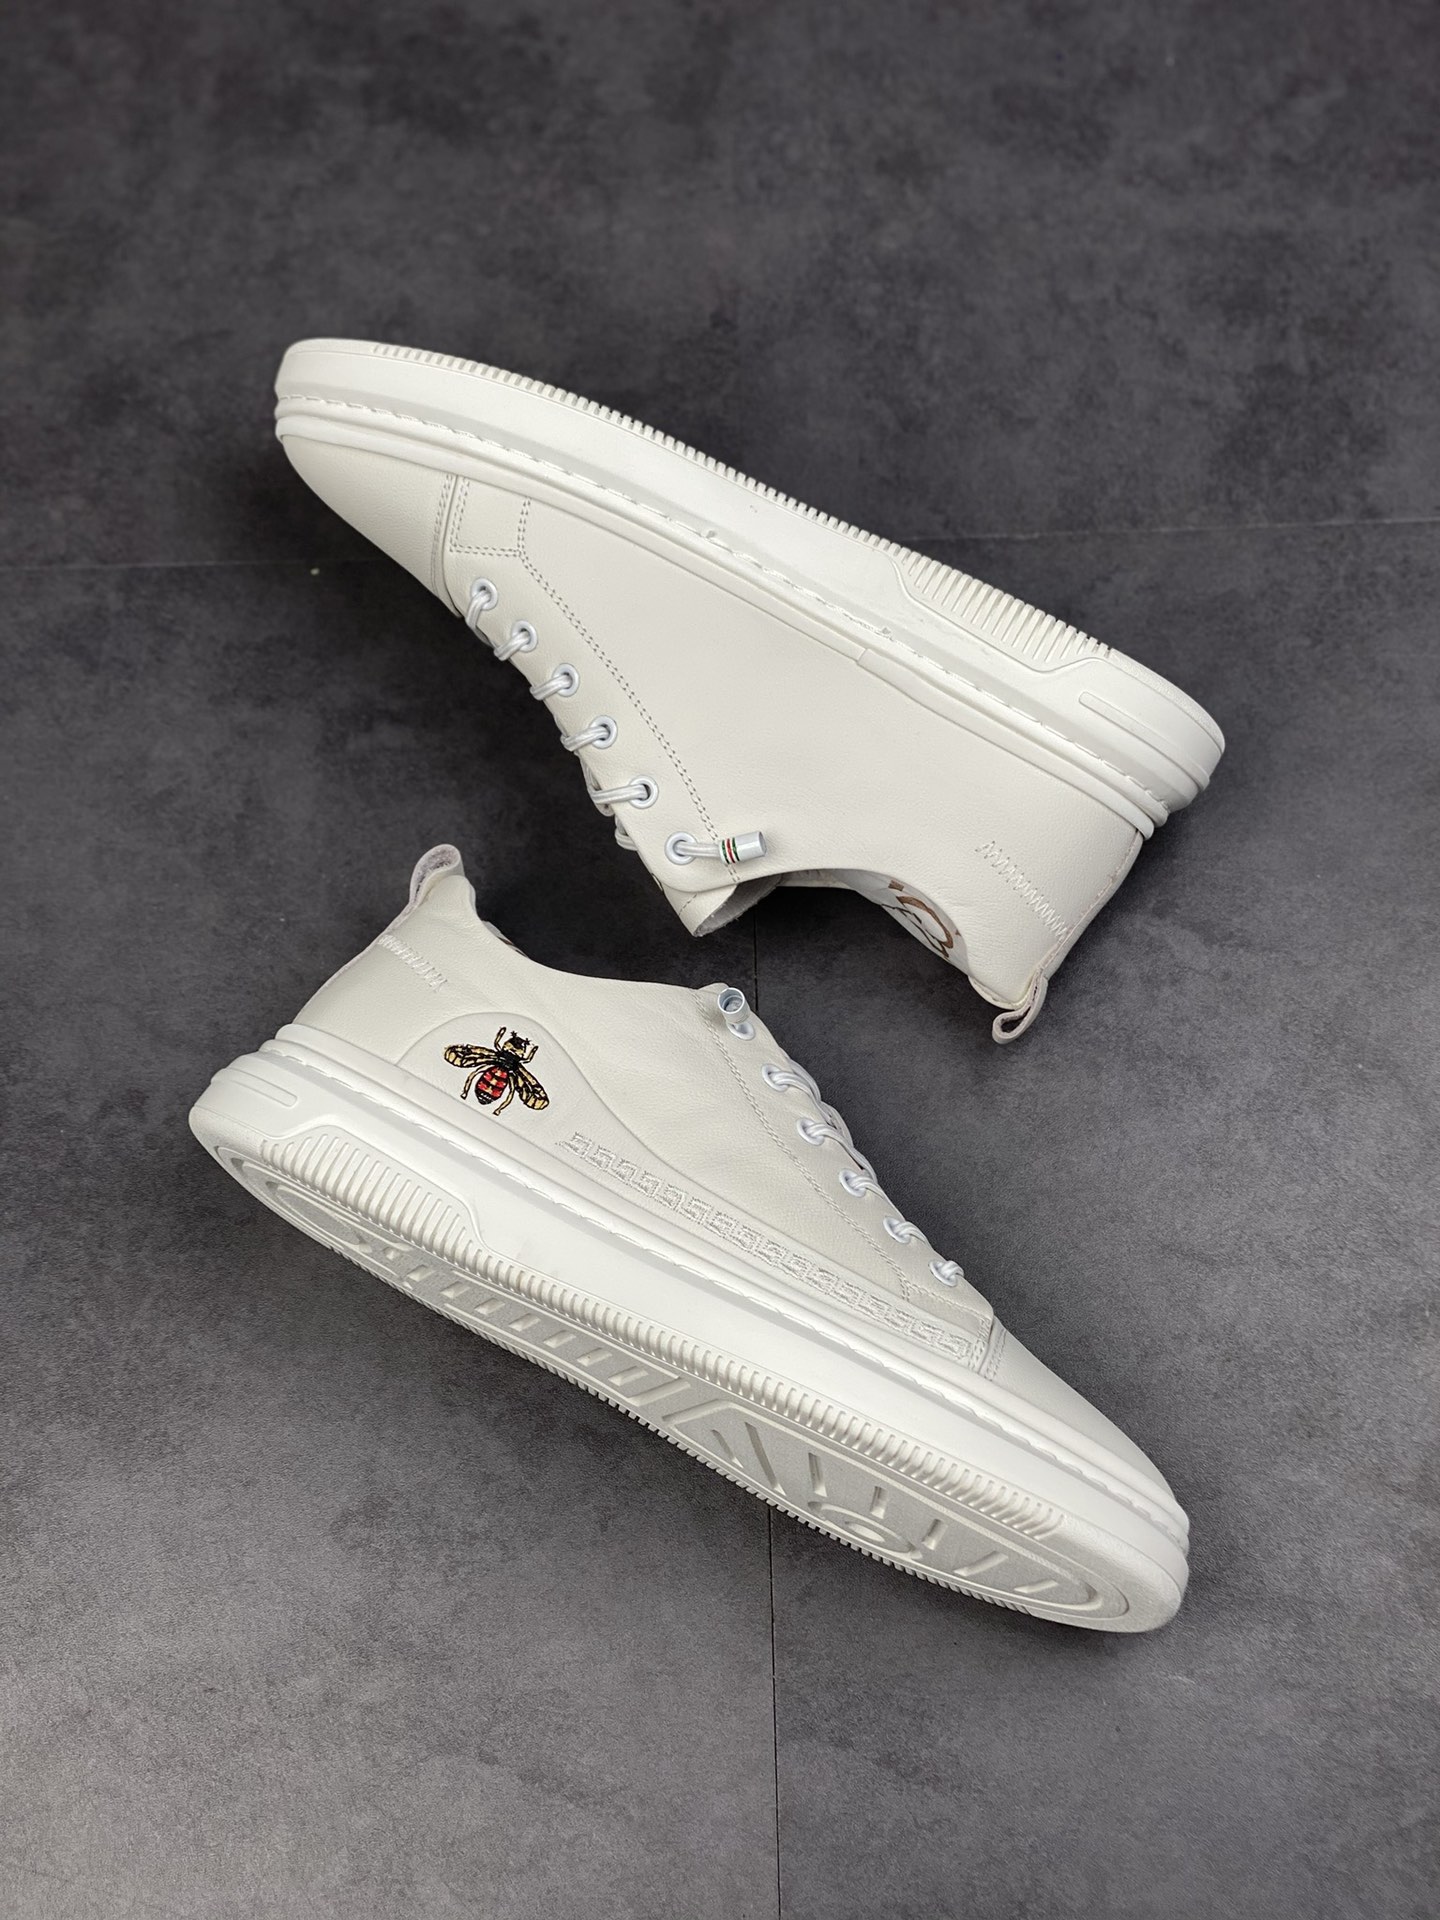 Gucci sports and leisure trend sneakers series Guangdong quality original 22ss spring and summer new style